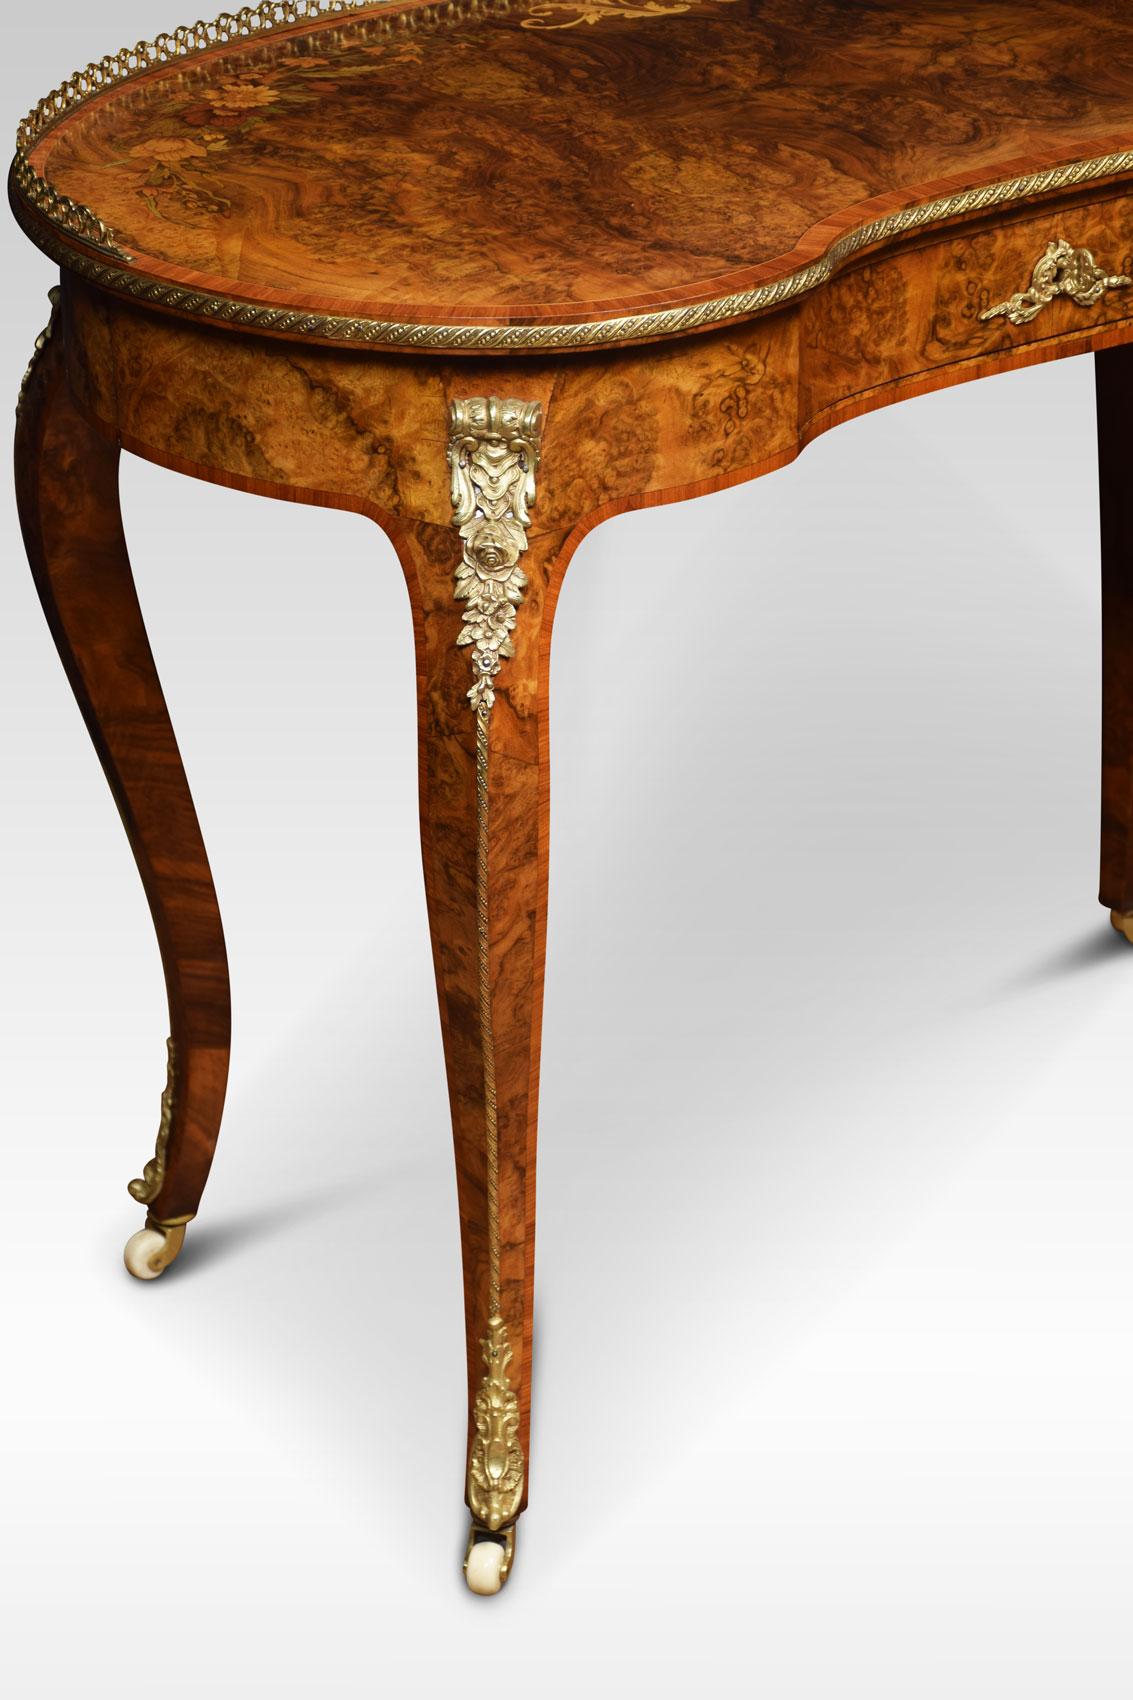 British 19th Century Burr Walnut and Marquetry Kidney Shaped Writing Table